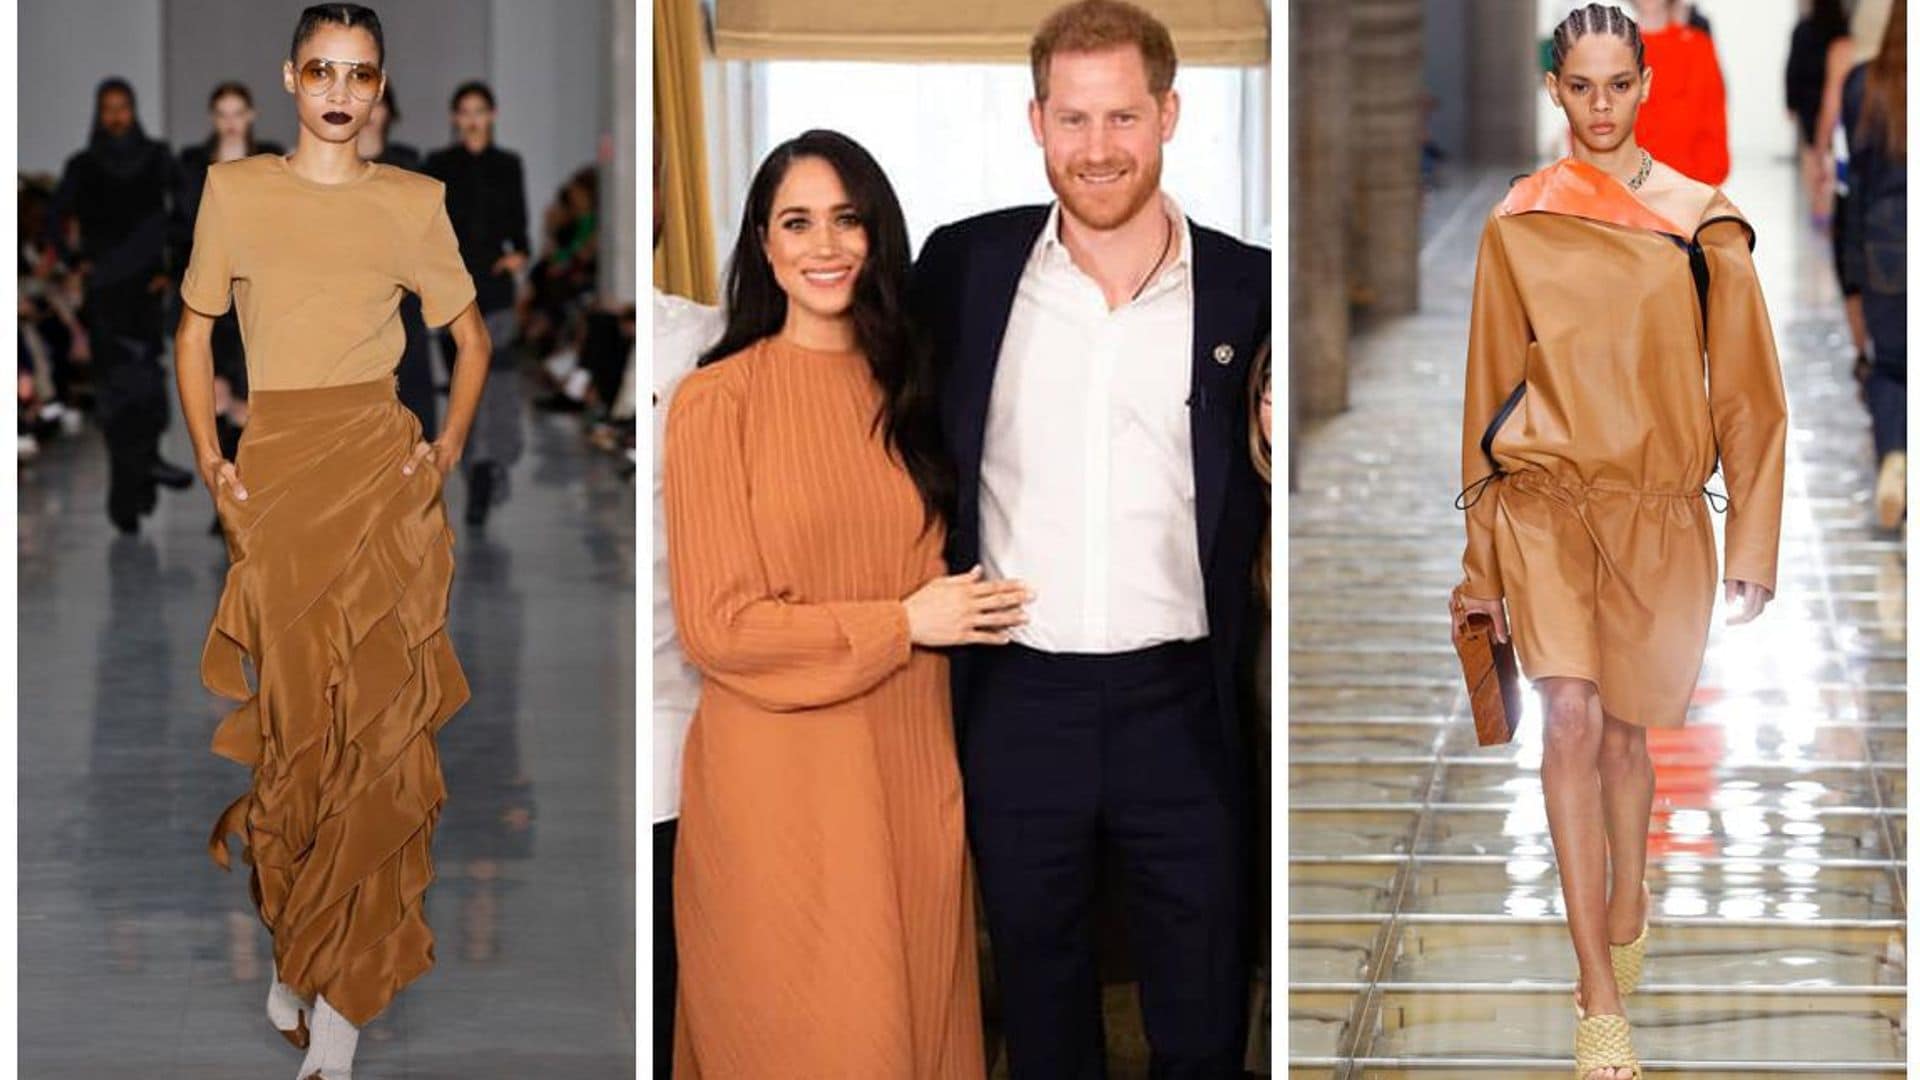 Meghan Markle opts for toffee-color dresses to refresh her spring looks